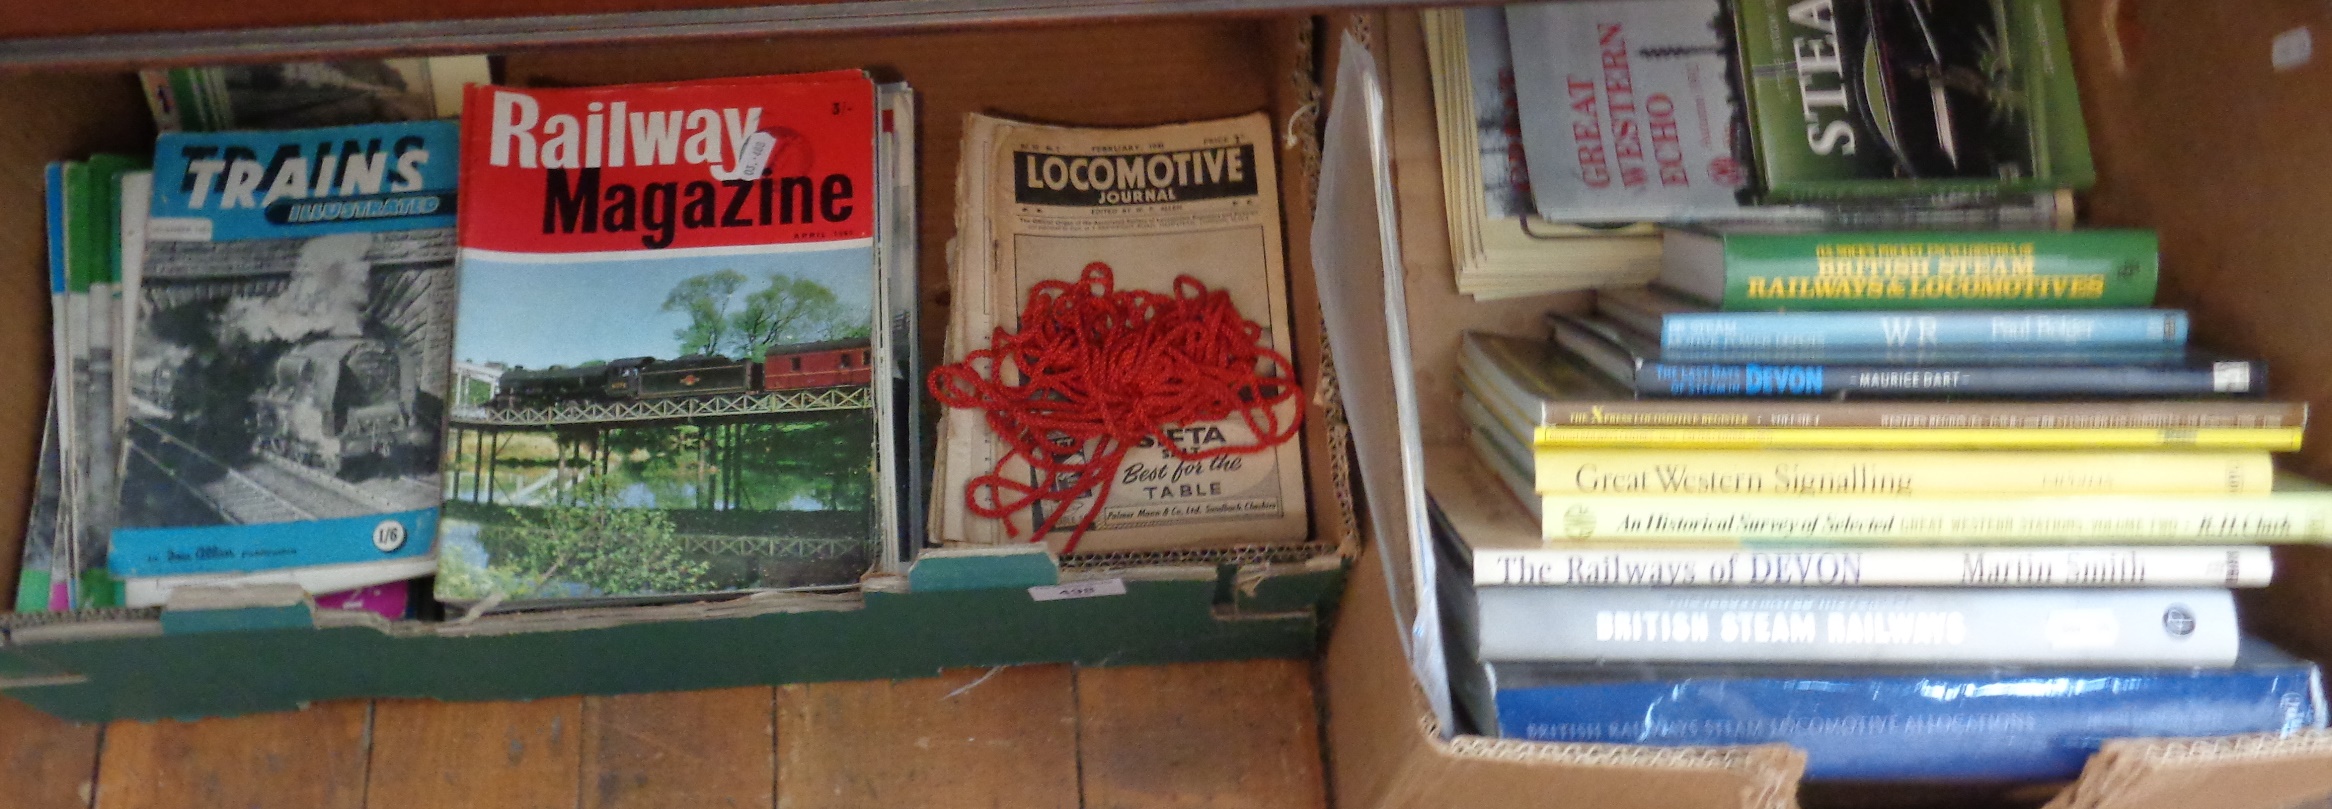 Good collection of Railway Magazines and books including 1940's Locomotive Journals and 1950's